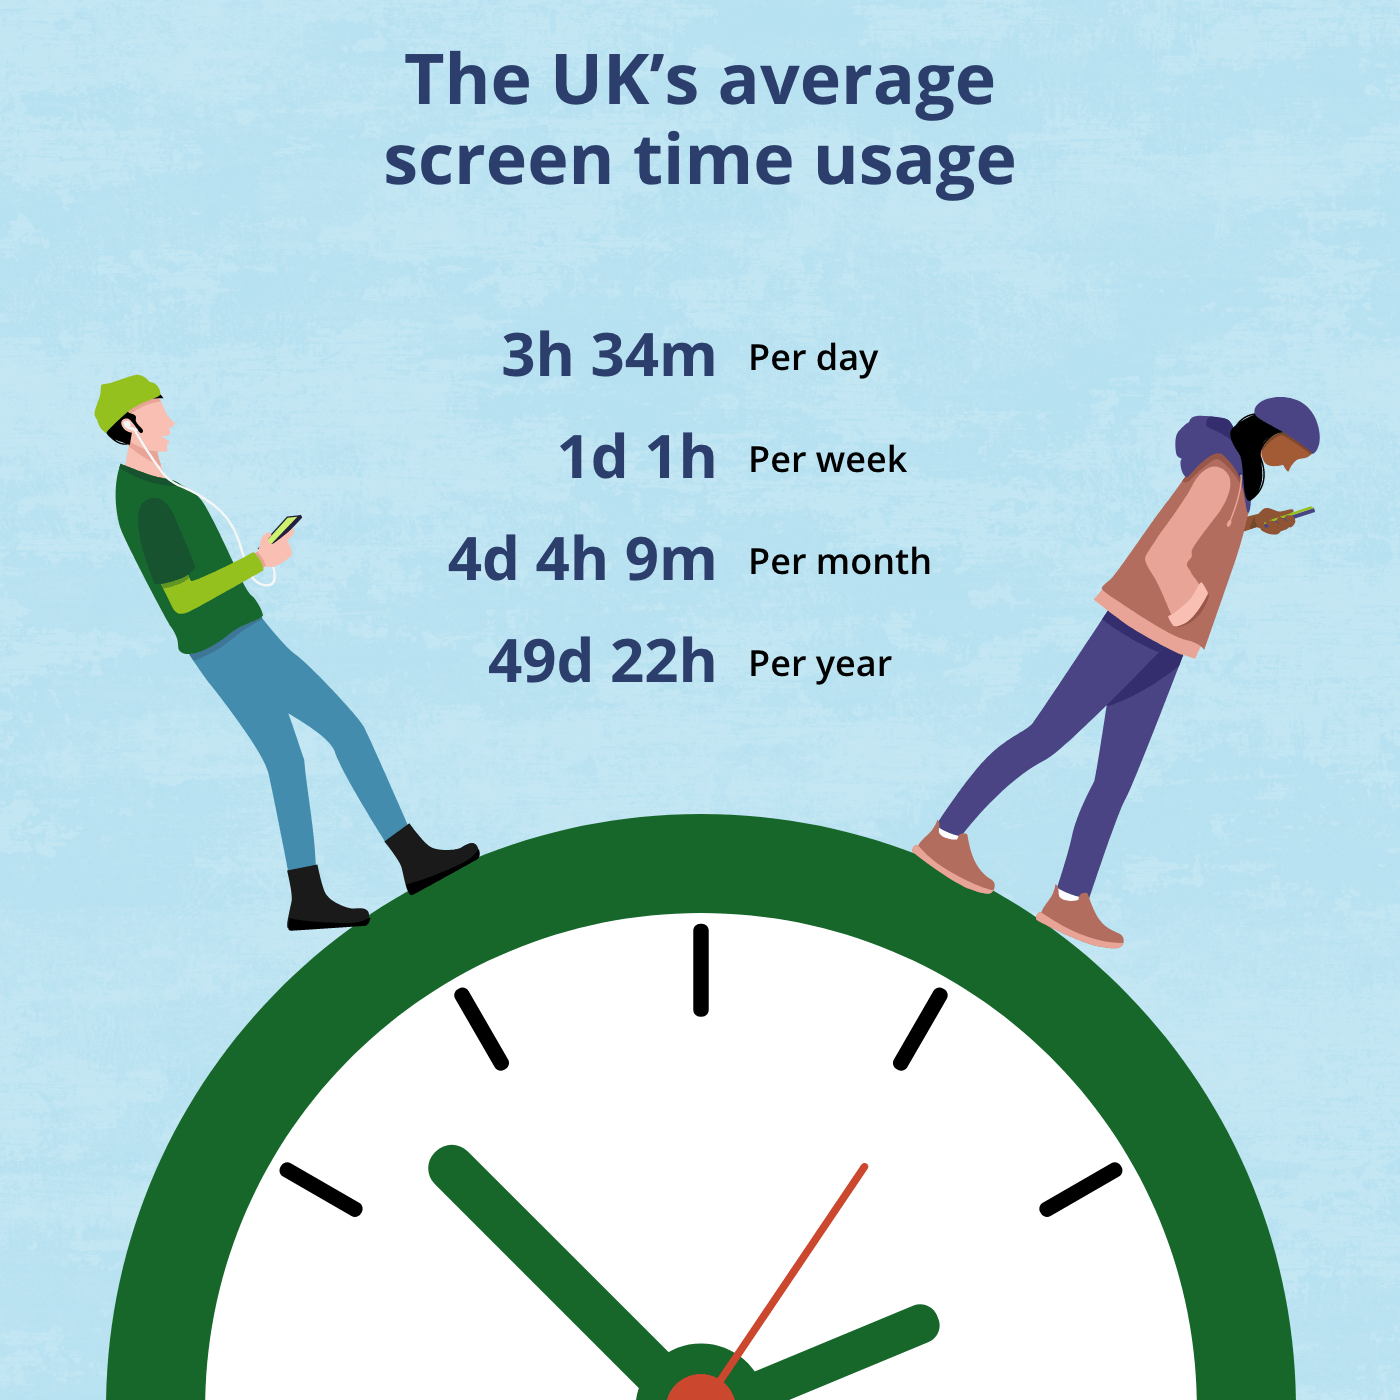 The UKs average screen time